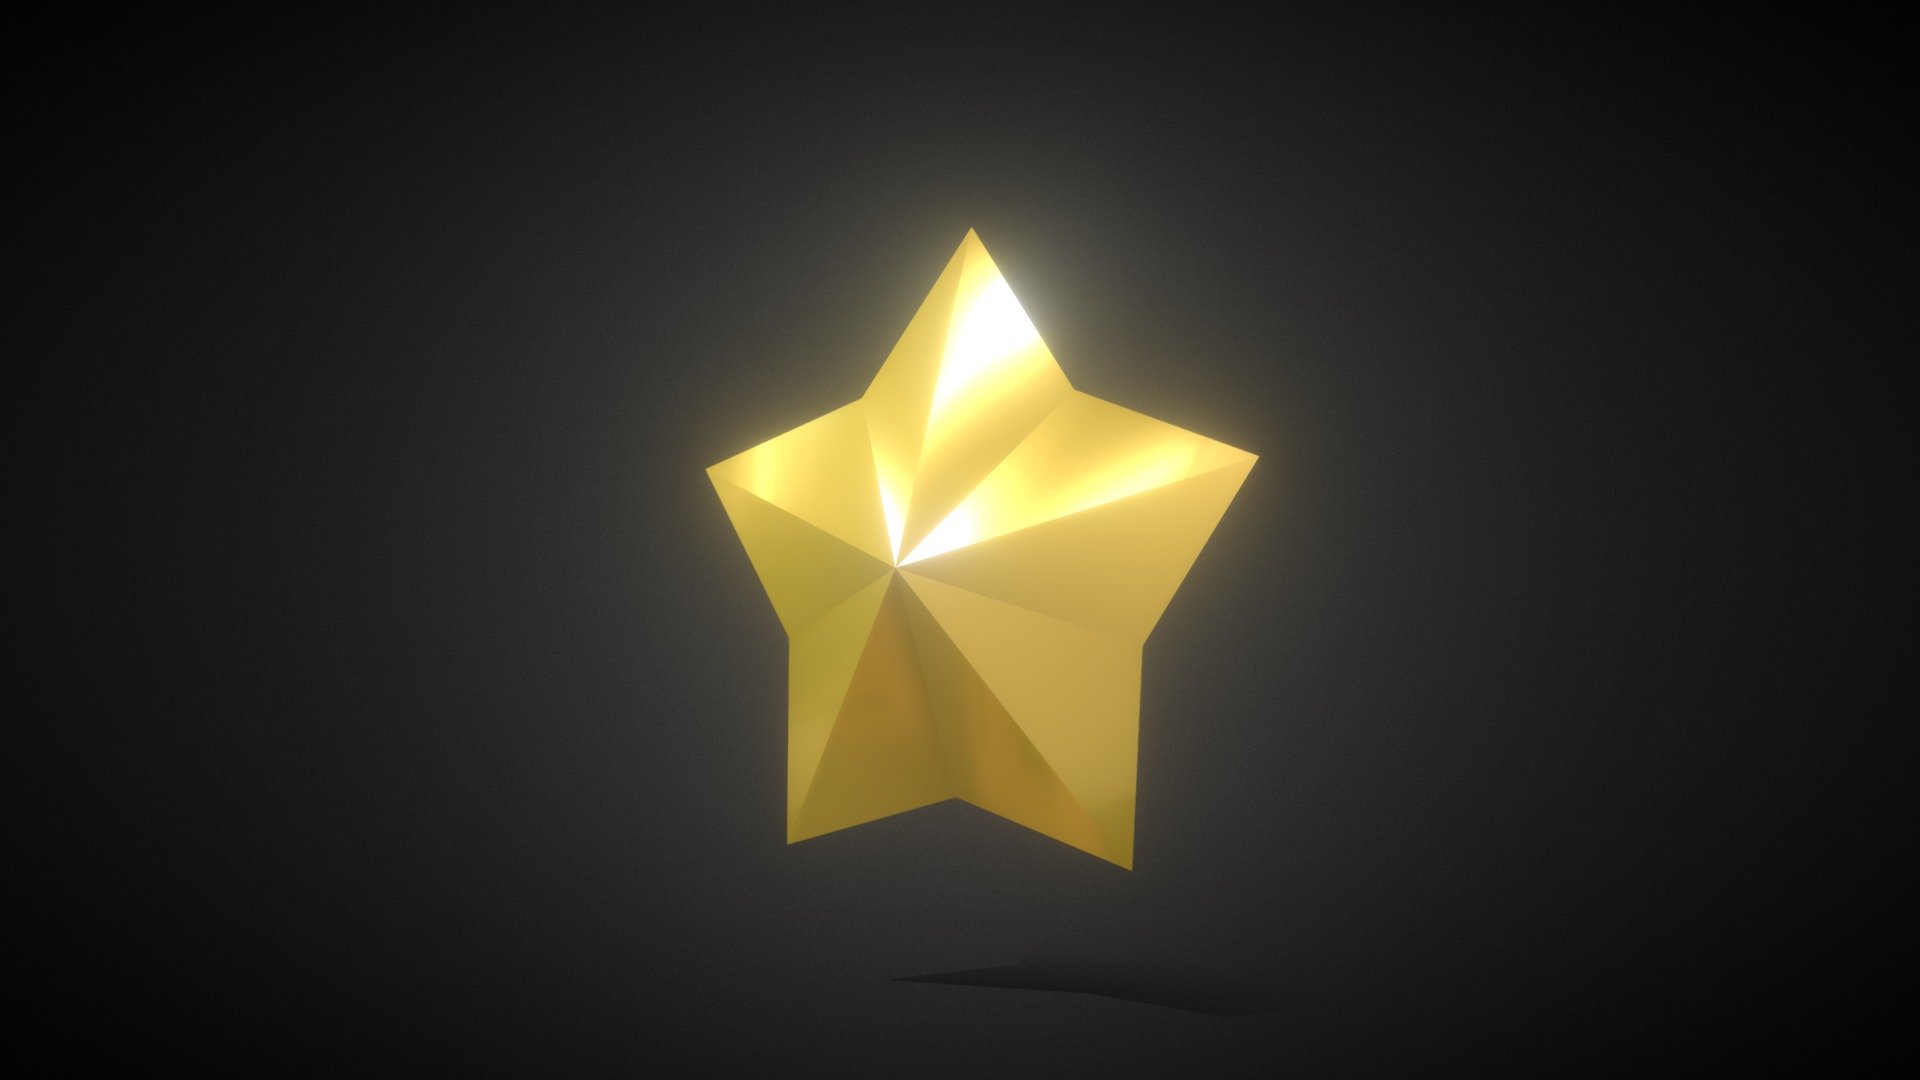 This is a simple, geometric 3D Star. 
Completely symmetrical, ideal for a rotation animation for a bonus, power up or score in a game.
Material is highly reflective, gold-like. Emits a subtle glow. Low poly count, single sided for performance. 
No texture needed.

P.S. This is one of my first upload so if you see room for improvement feel free to leave a comment (be kind!) - Fat Gold Star - Buy Royalty Free 3D model by Roberto Chiaveri (@roberto.chiaveri) 3d model